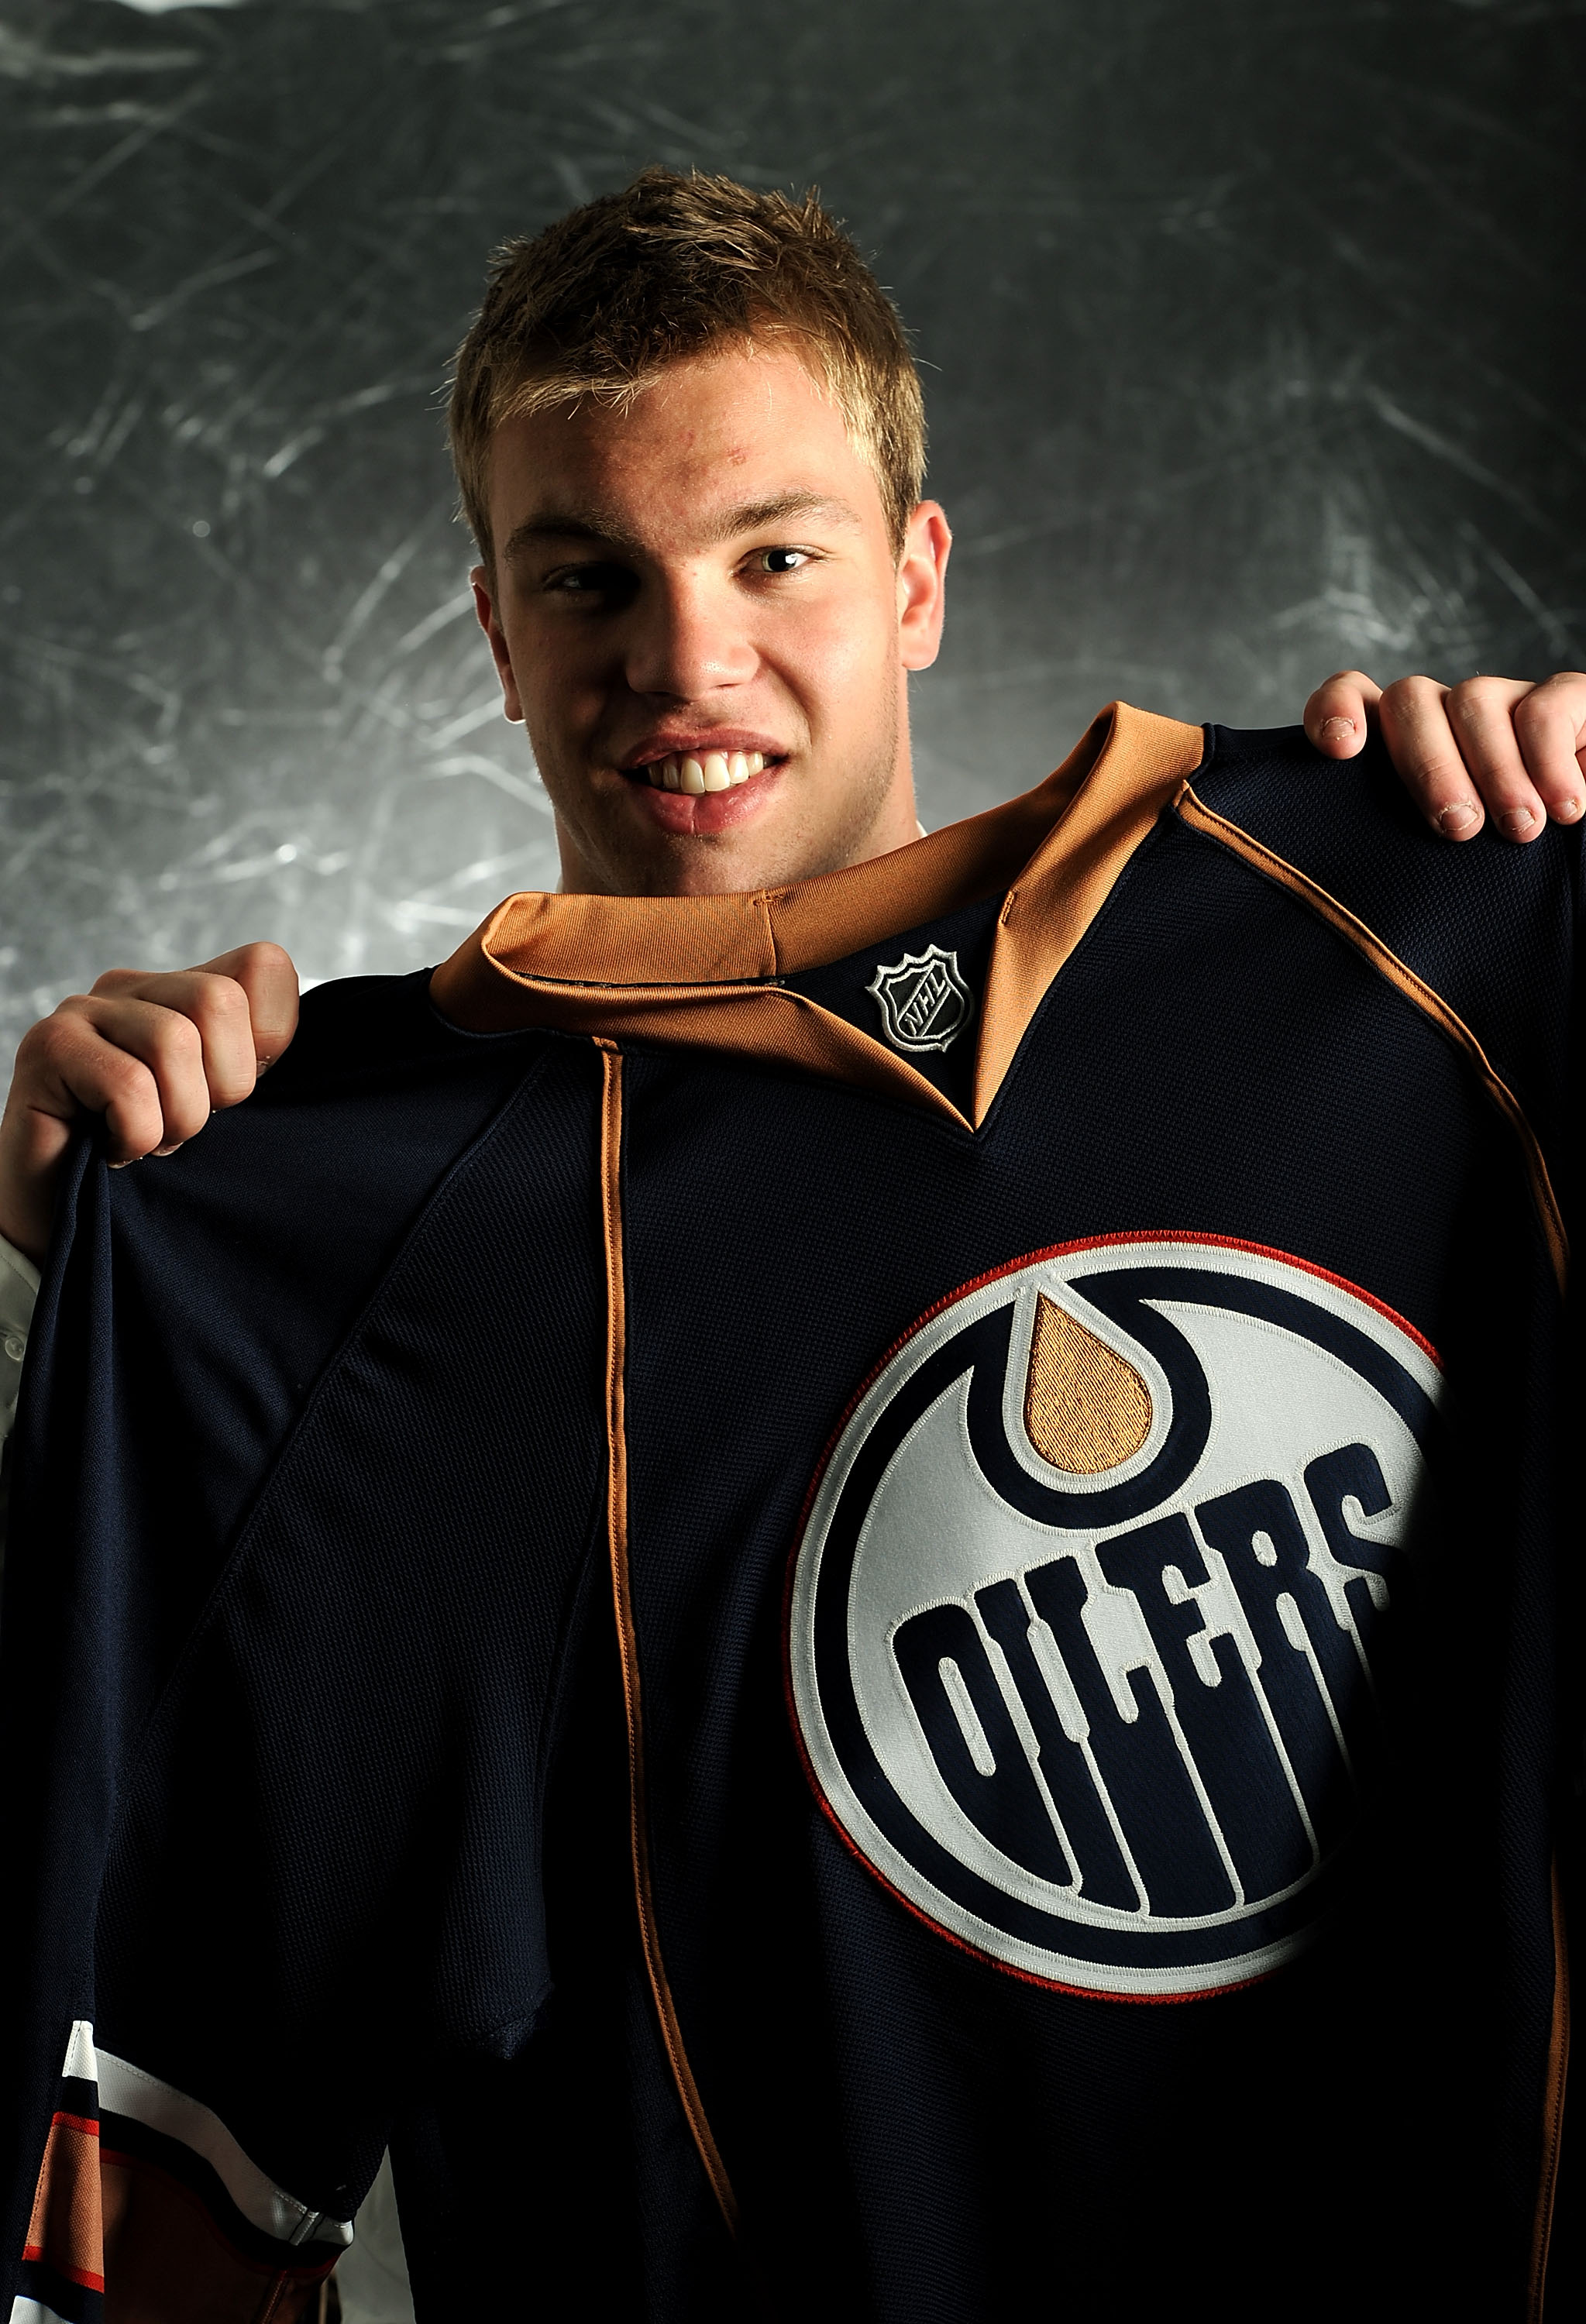 LOS ANGELES, CA - JUNE 25:  Taylor Hall, drafted first overall by the Edmonton Oilers, poses for a portrait during the 2010 NHL Entry Draft at Staples Center on June 25, 2010 in Los Angeles, California.  (Photo by Harry How/Getty Images)